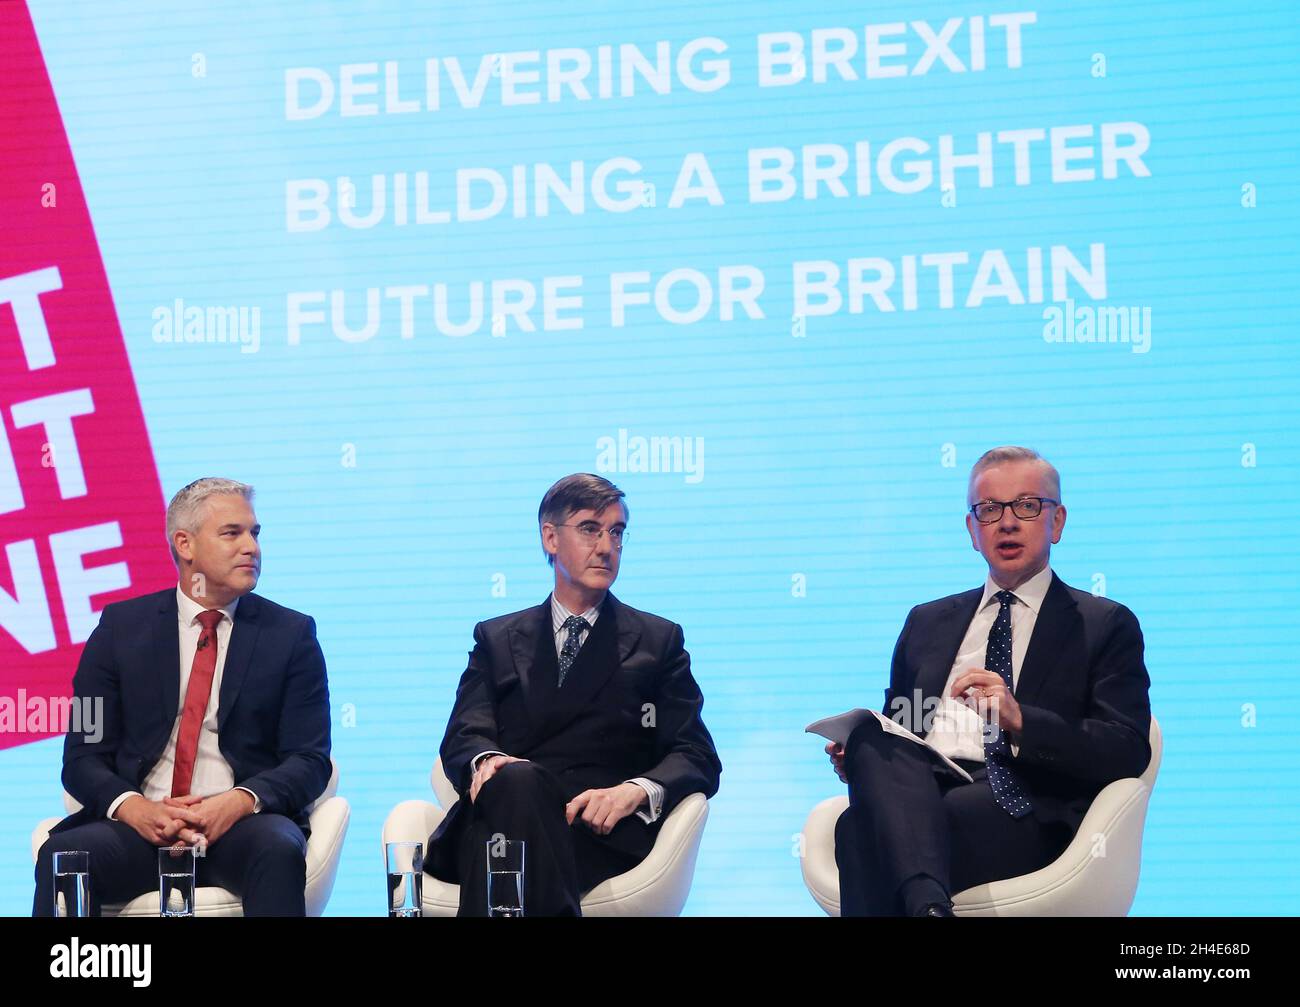 (left to right) Brexit Secretary Stephen Barclay, Leader of the House of Commons Jacob Rees-Mogg and Chancellor of the Duchy of Lancaster Michael Gove during the 'Delivering Brexit' session on day one of the Conservative Party Conference being held at the Manchester Convention Centre Stock Photo